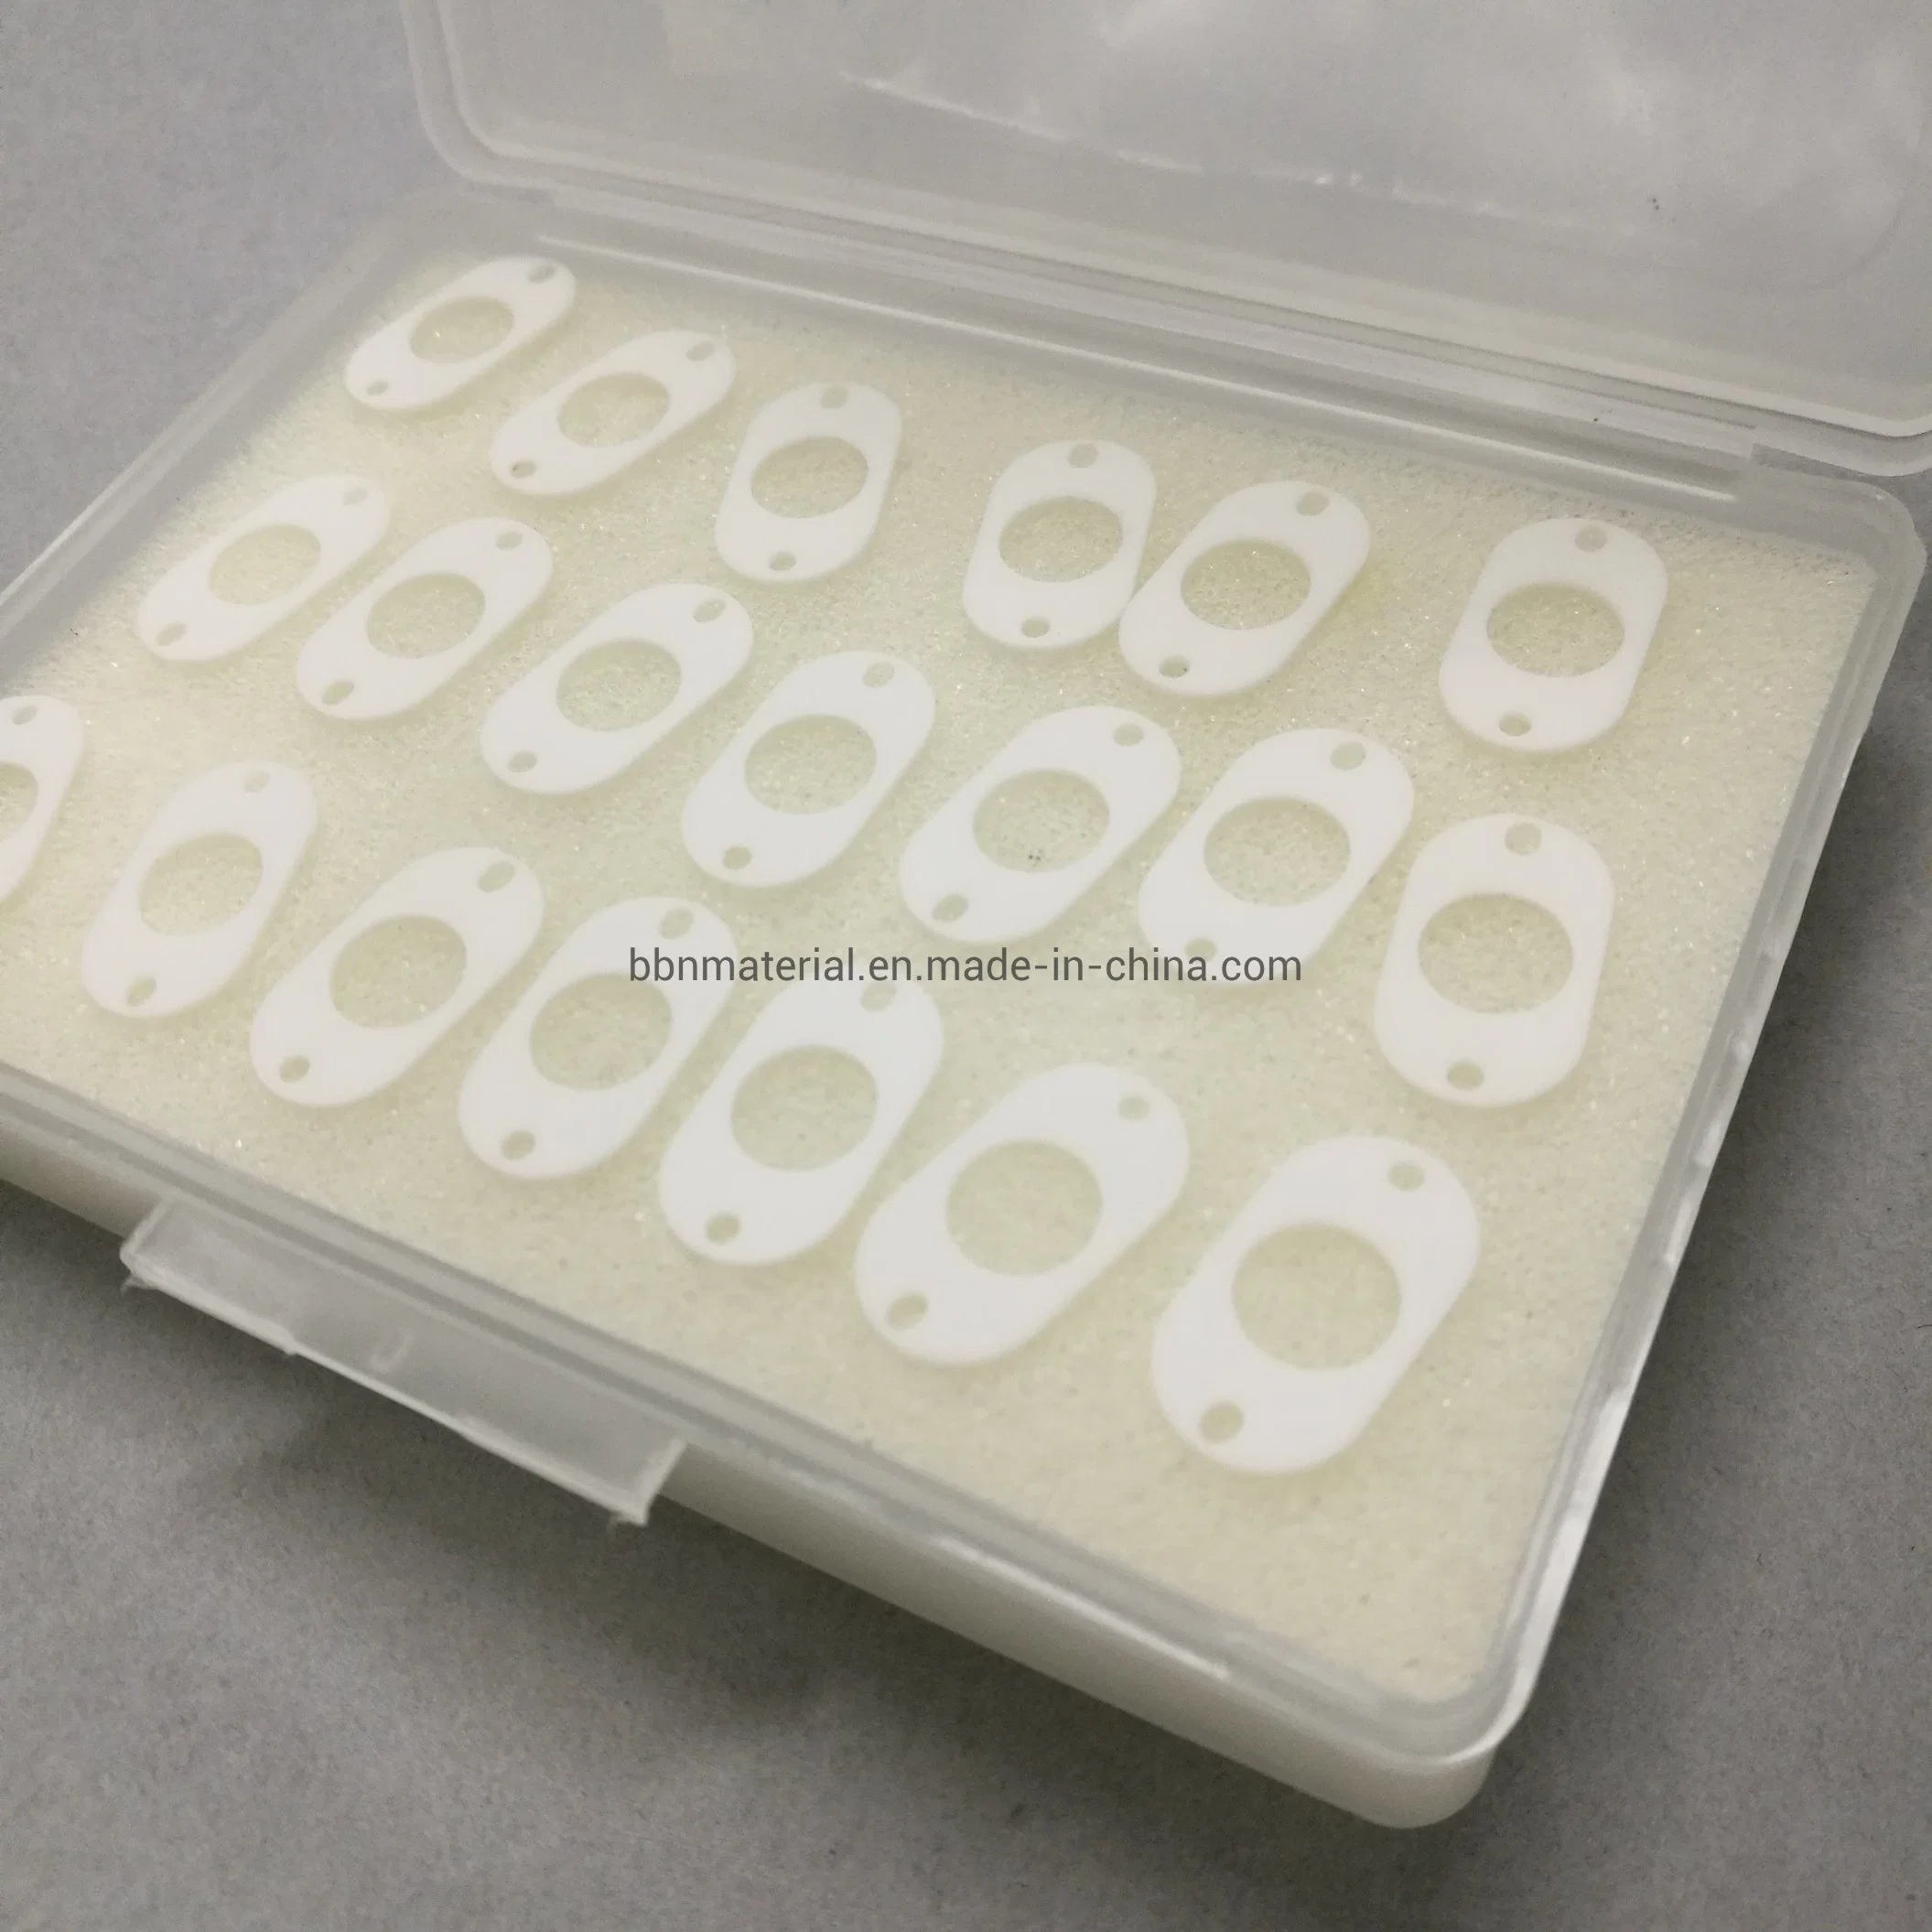 CNC Easy Machinable Glass Ceramic Mgc Macor Substrate Plate Block for Structural Slab Parts